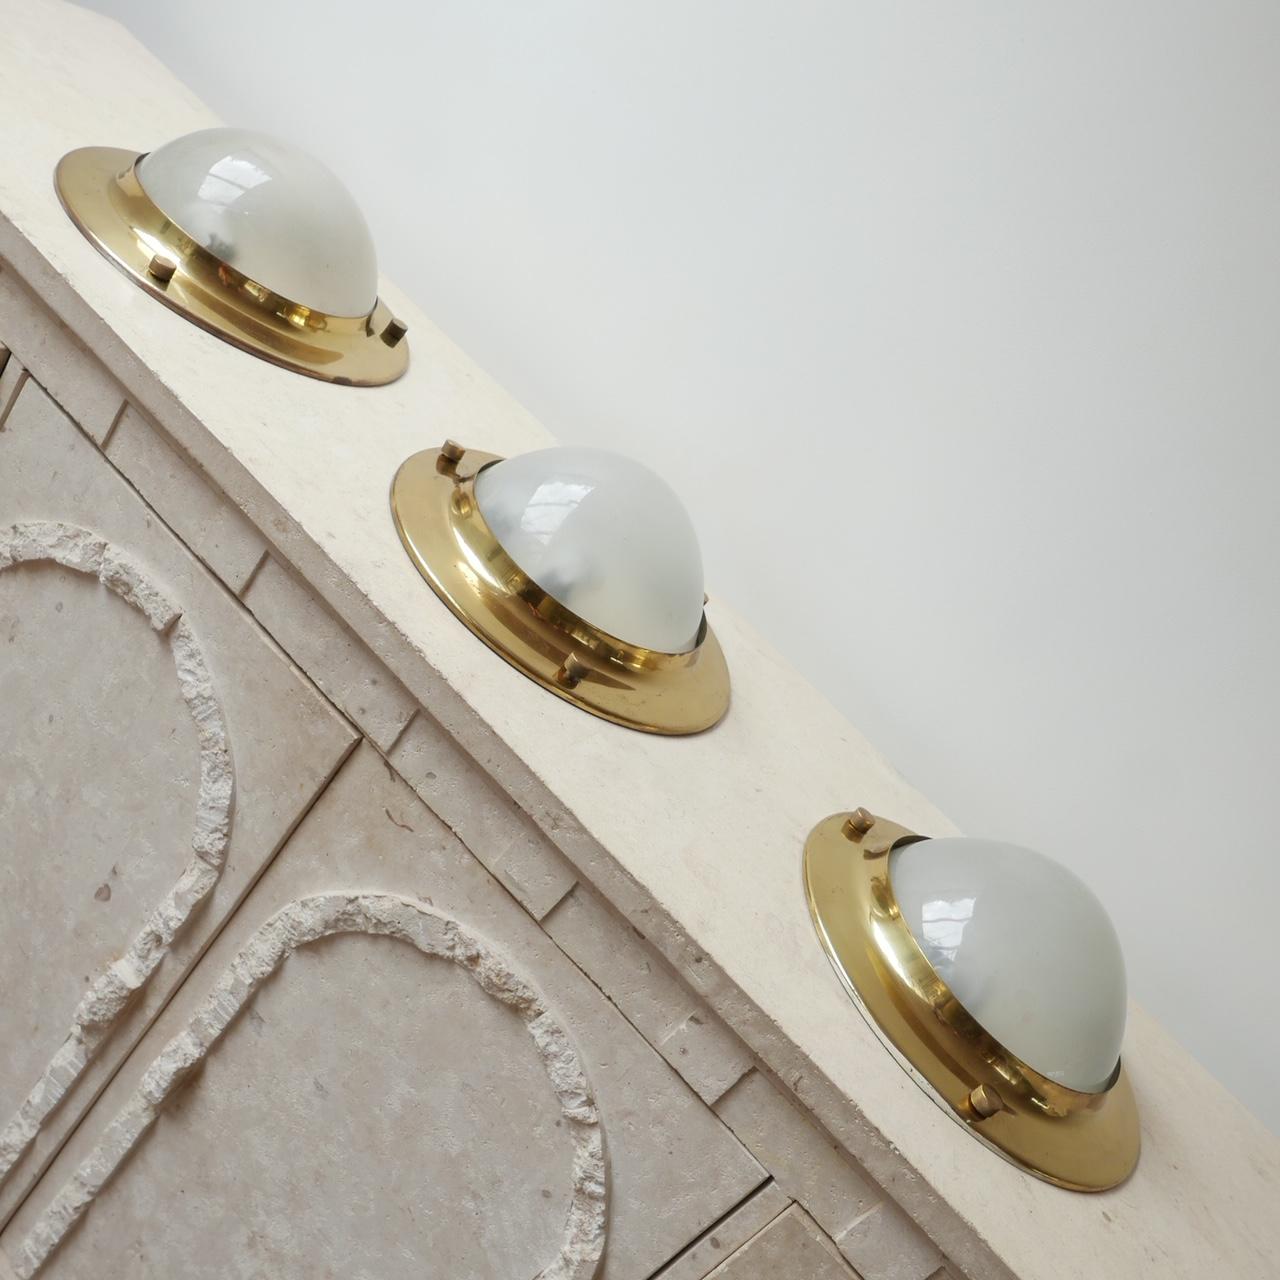 A run of three matching brass and etched glass wall or ceiling lights,

Italian, circa 1960s.

Attributed to Luigi Caccia Dominioni as the 'Tommy' model.

The lights can be used for the wall but lend themselves more to ceiling lights because